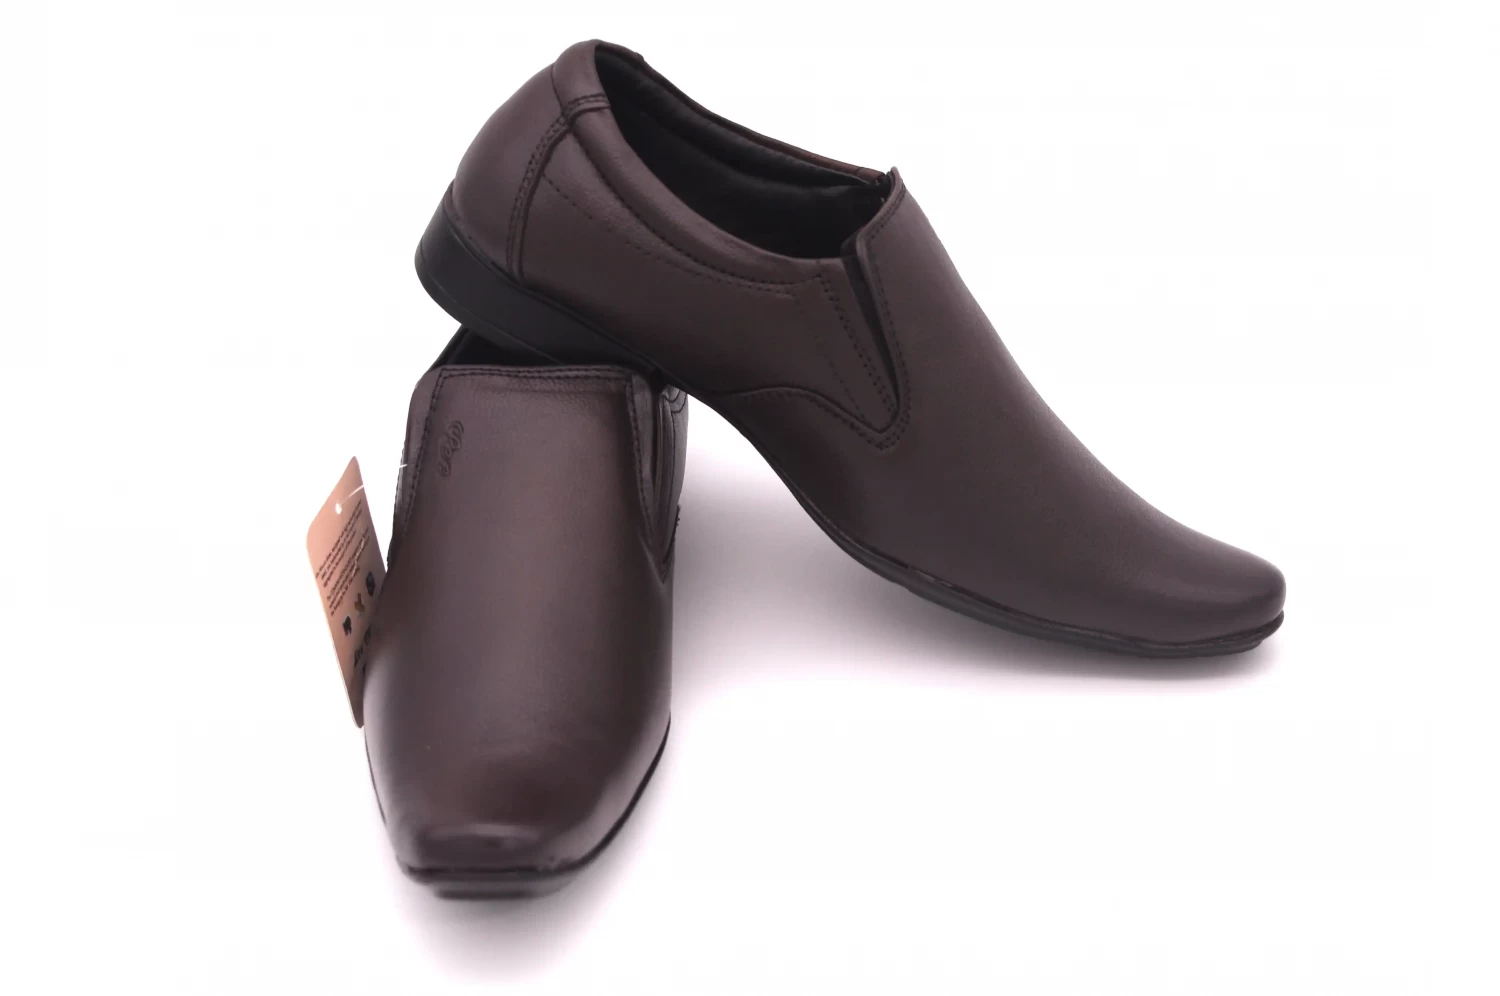 Lee Classic - No lace Formal Shoes